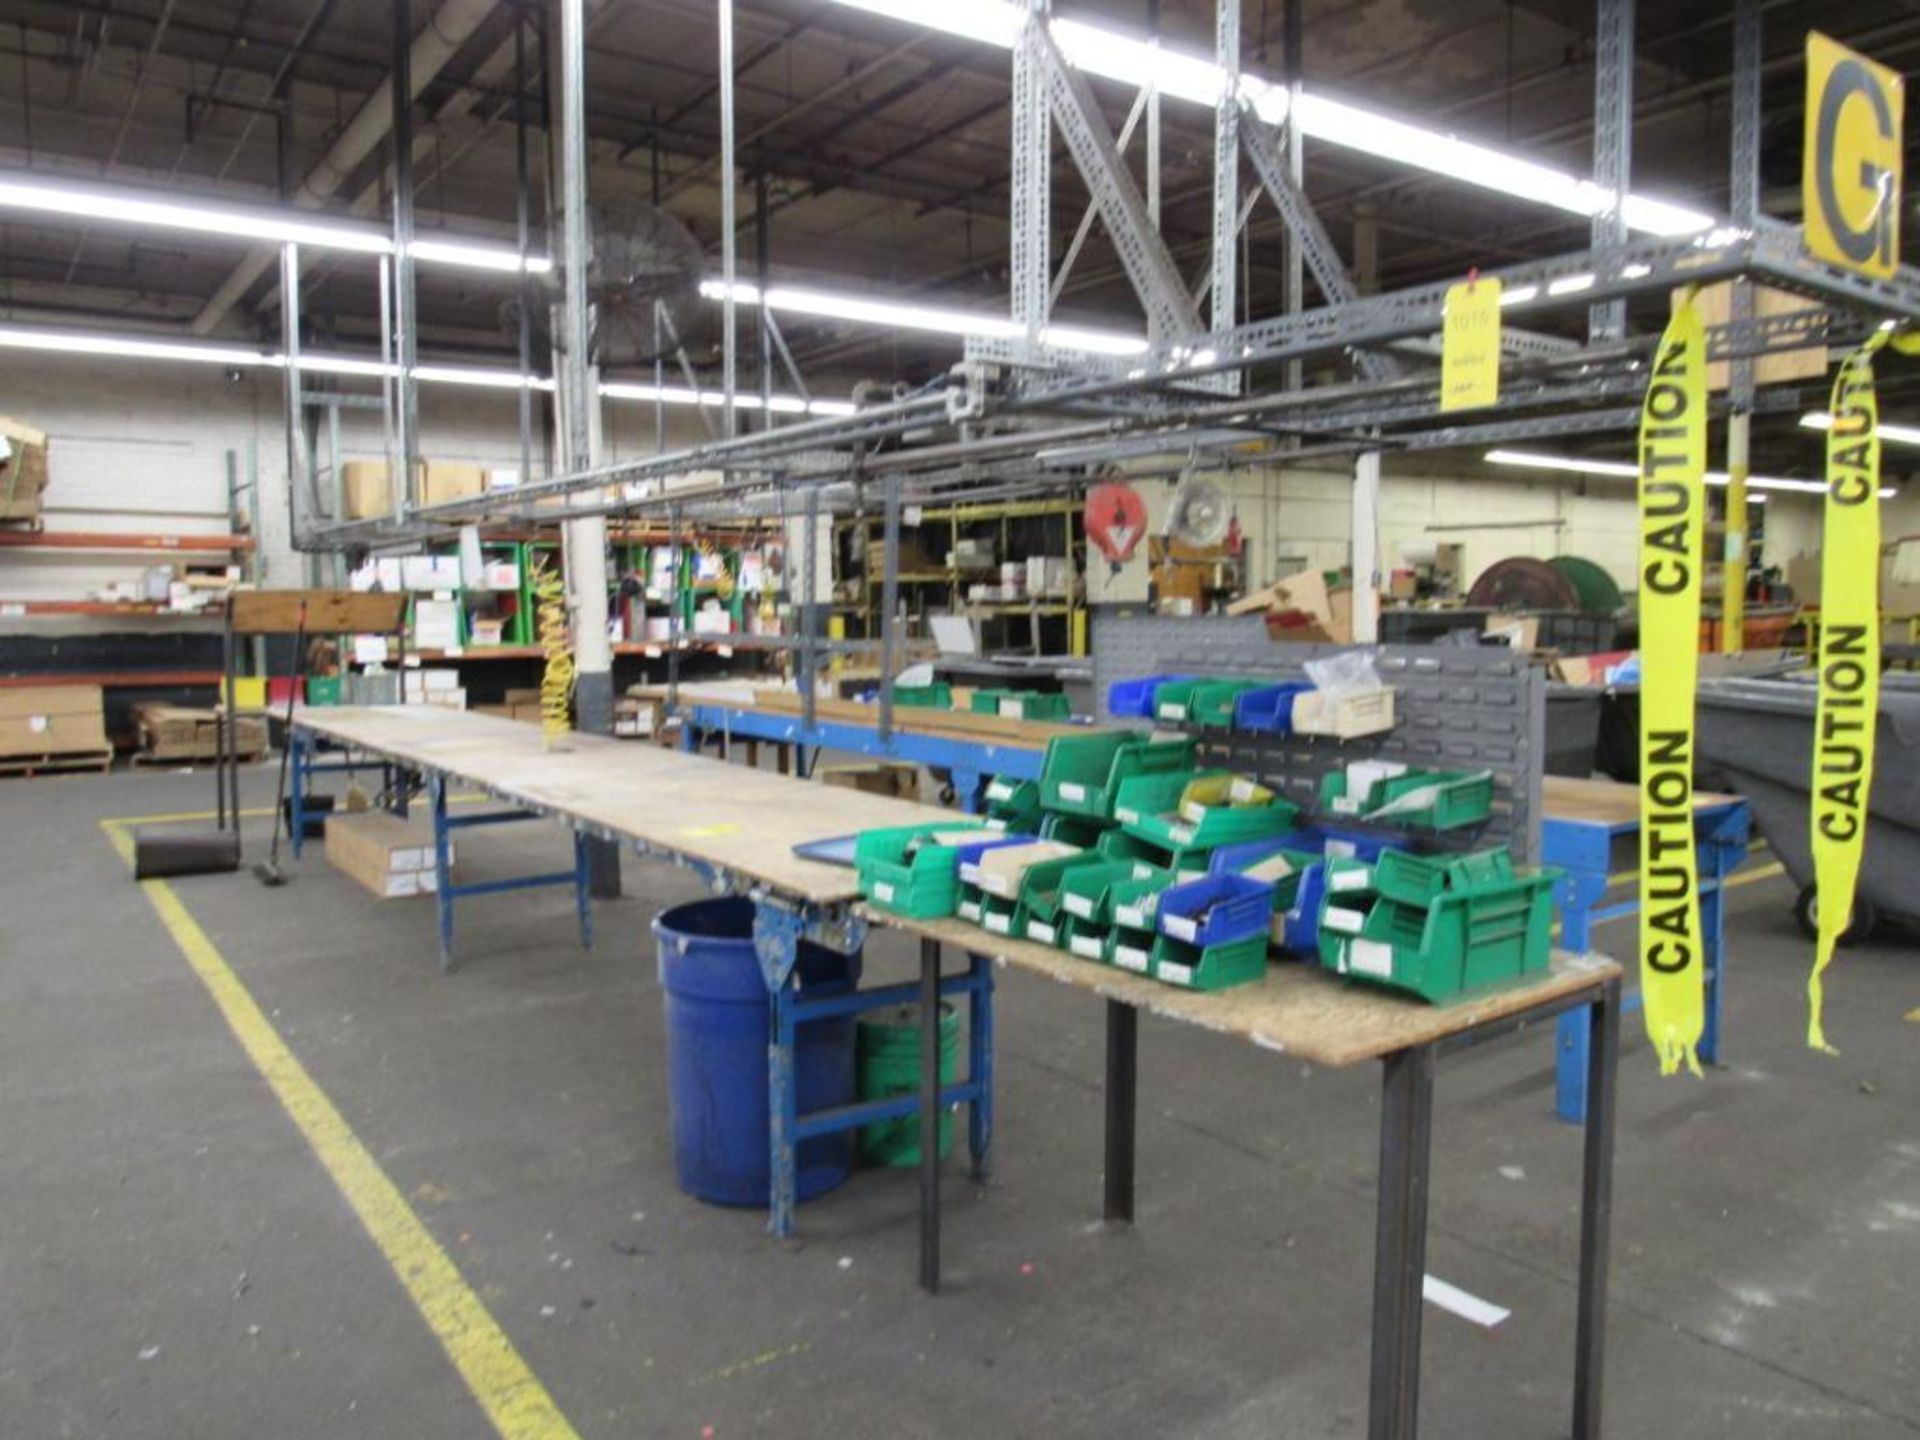 LOT: Packaging Line #C1 including: (2) Conveyors used as Tables - (1) 36 in. x 23 ft., (1) 36 in. x